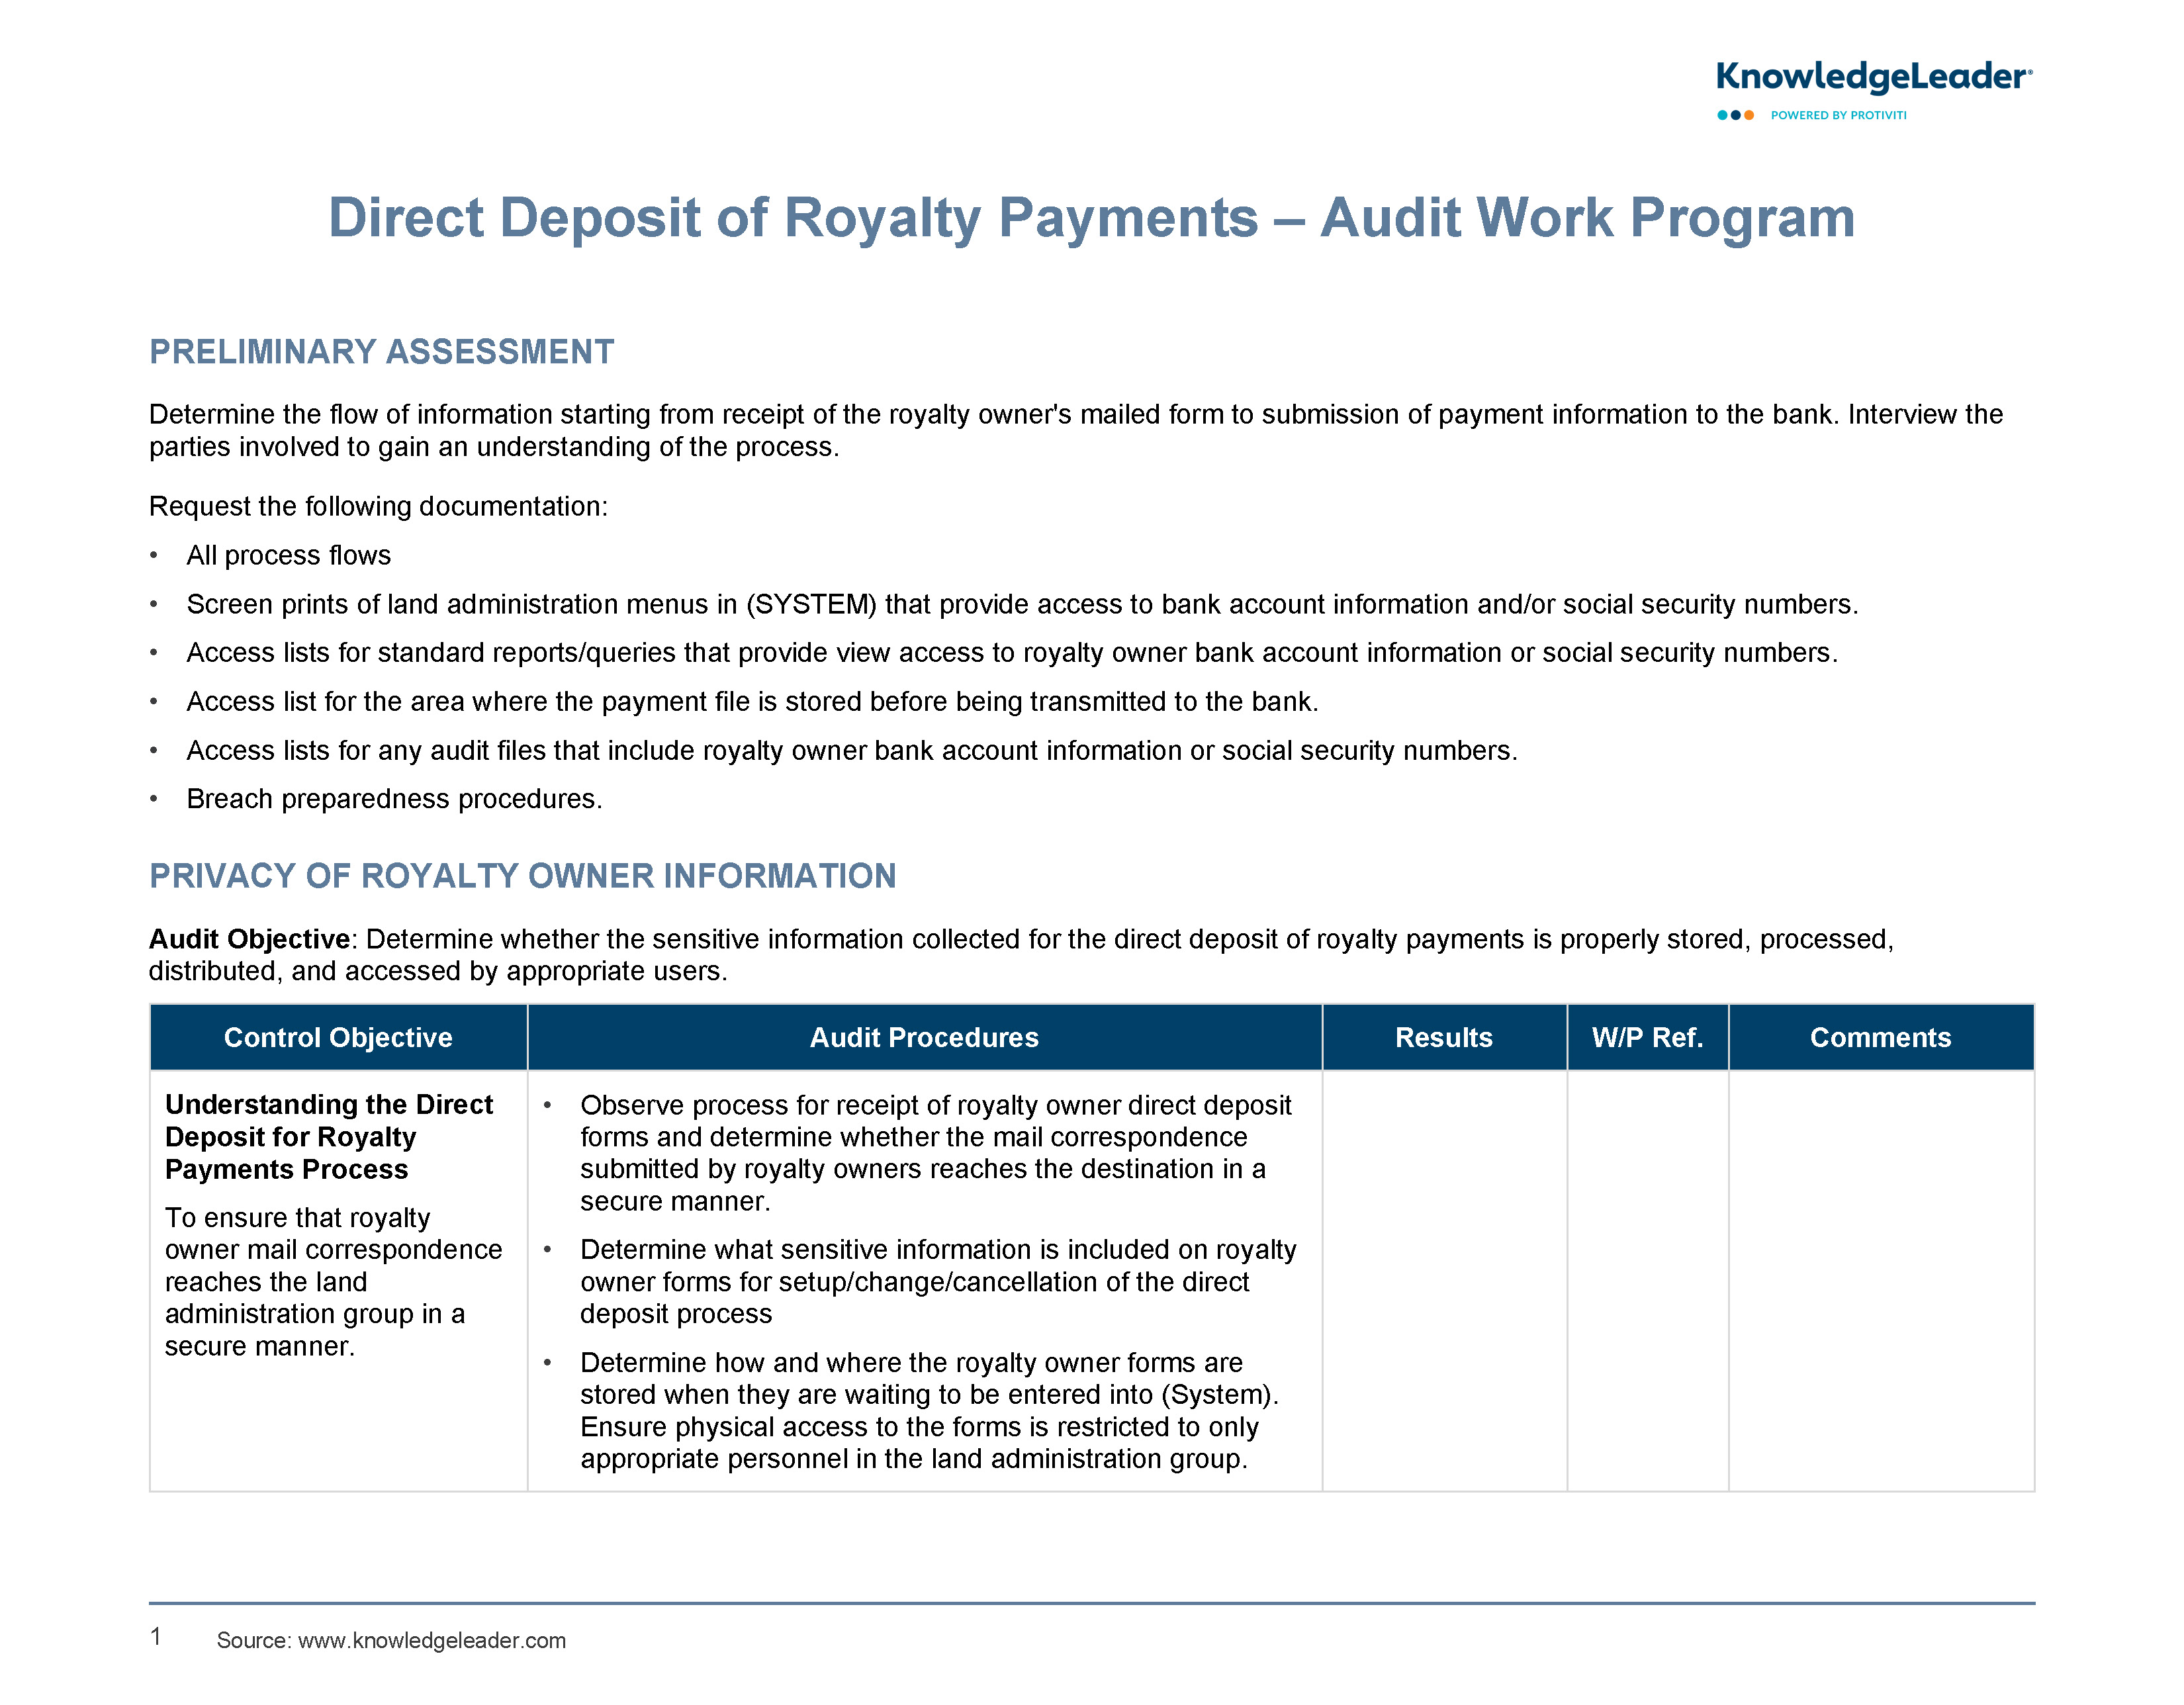 Screenshot of the first page of Direct Deposit of Royalty Payments - Audit Work Program